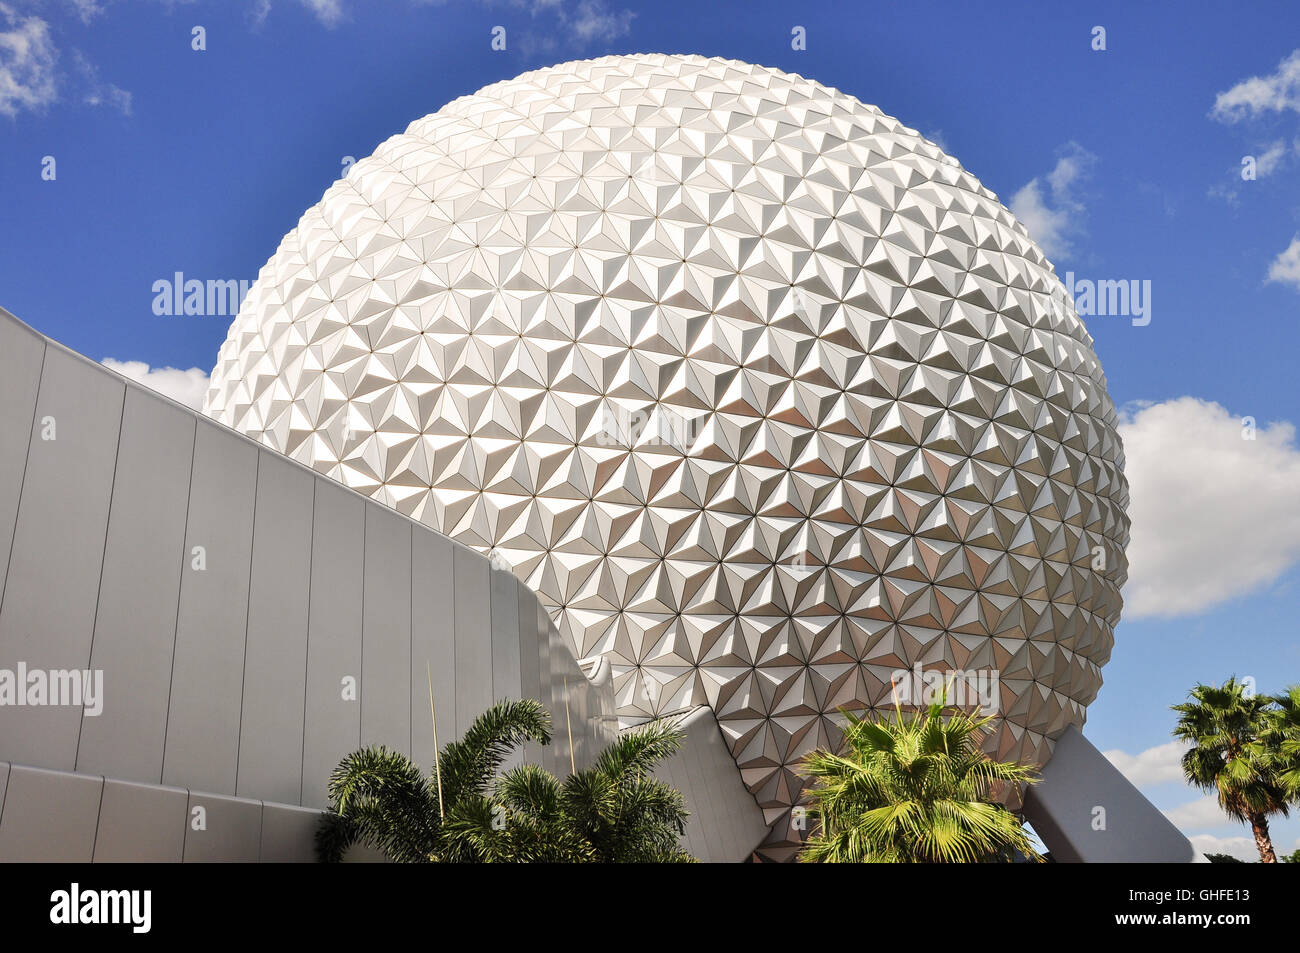 Spaceship Earth is the symbolic structure of Epcot, a theme park within The Disney World Resort in Orlando, Florida. Stock Photo